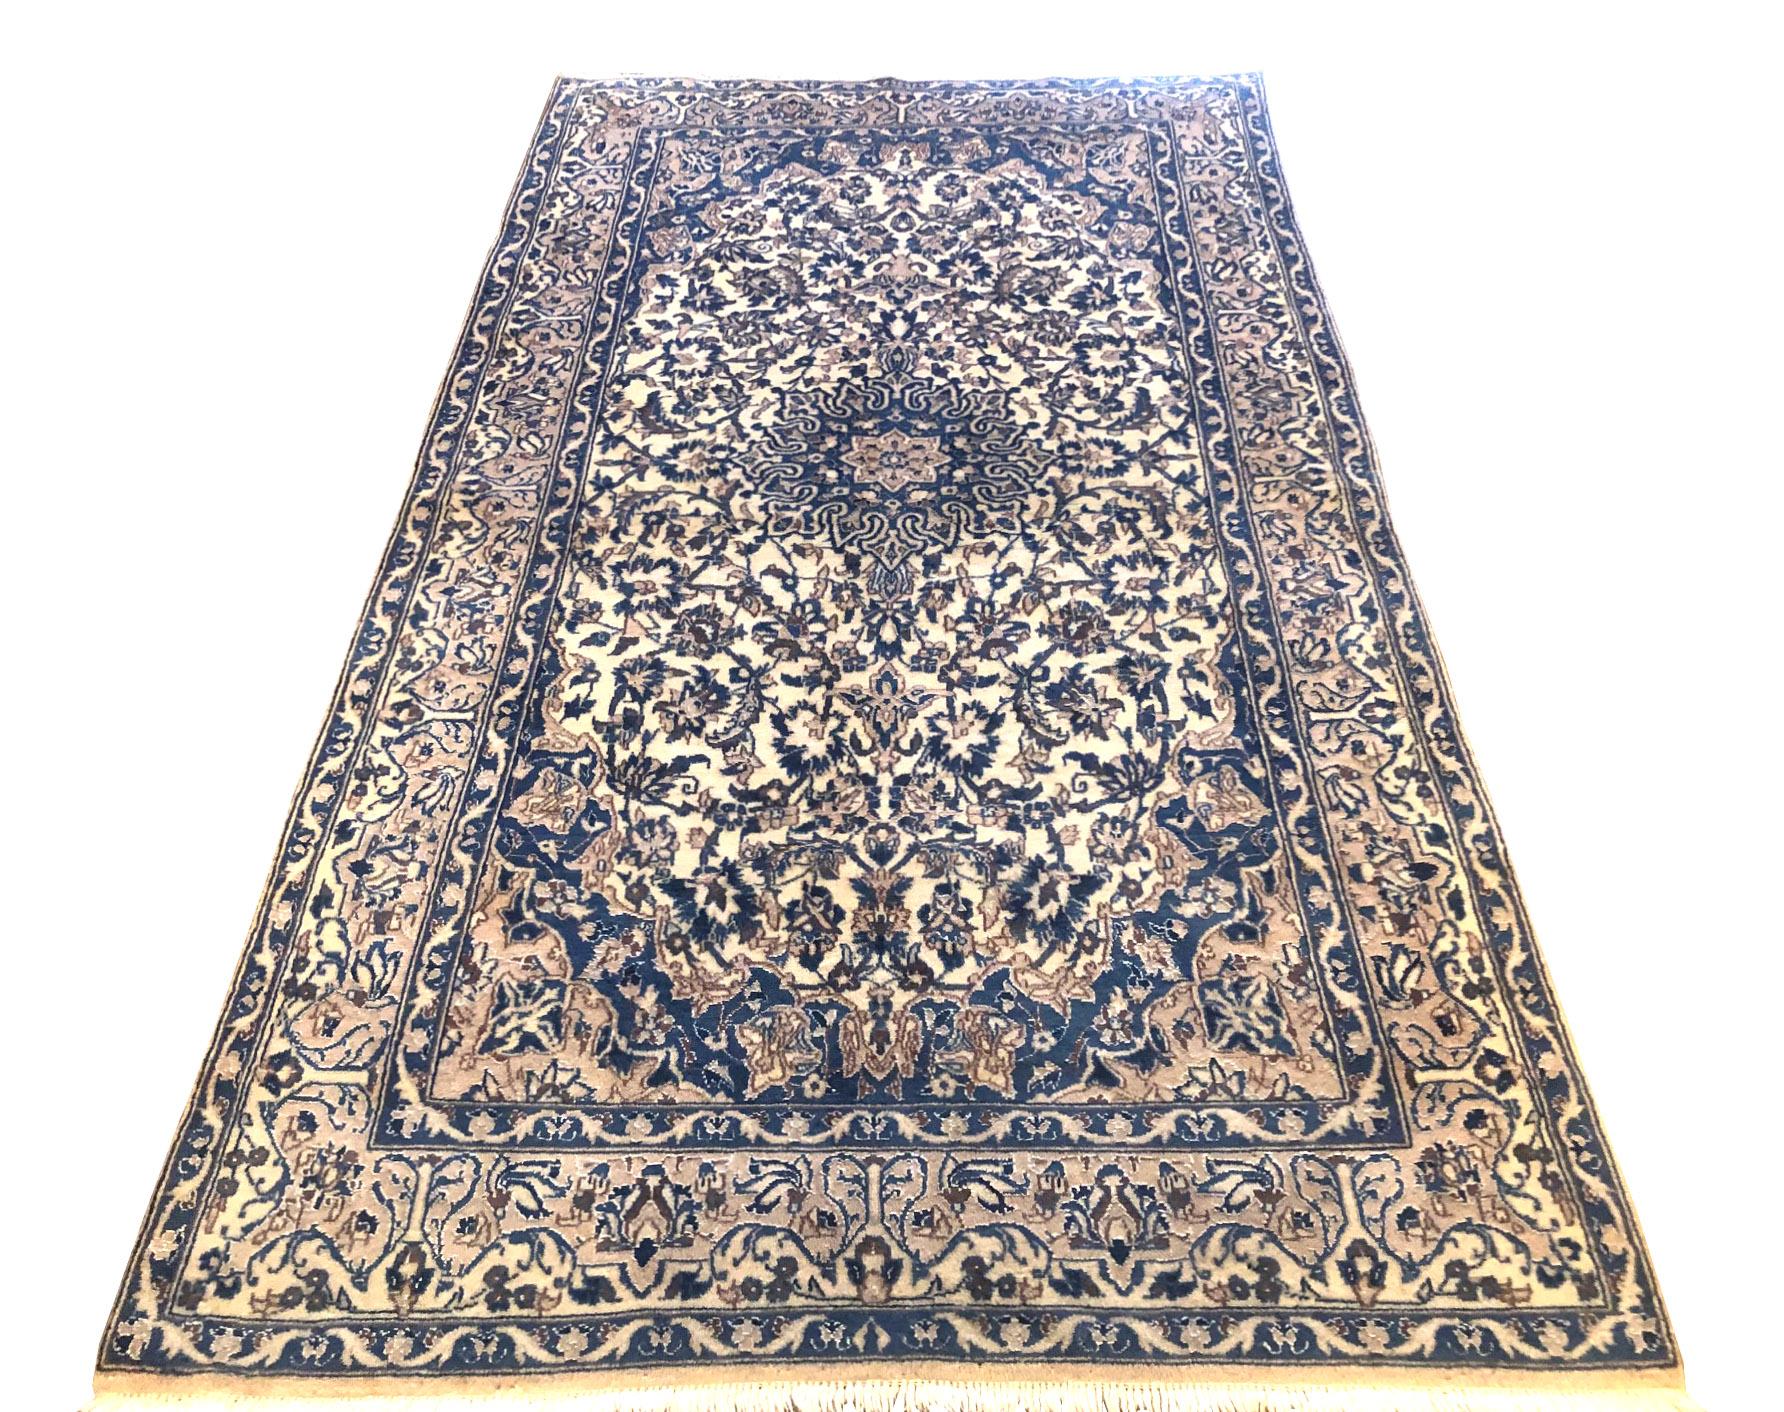 This authentic Persian handmade Nain (9 LA) rug has wool and silk pile with cotton foundation. Nain is a city in Iran that is well known for producing fine handmade rug. Nain rugs have a high reputation and are very popular. The size is 3 feet 8